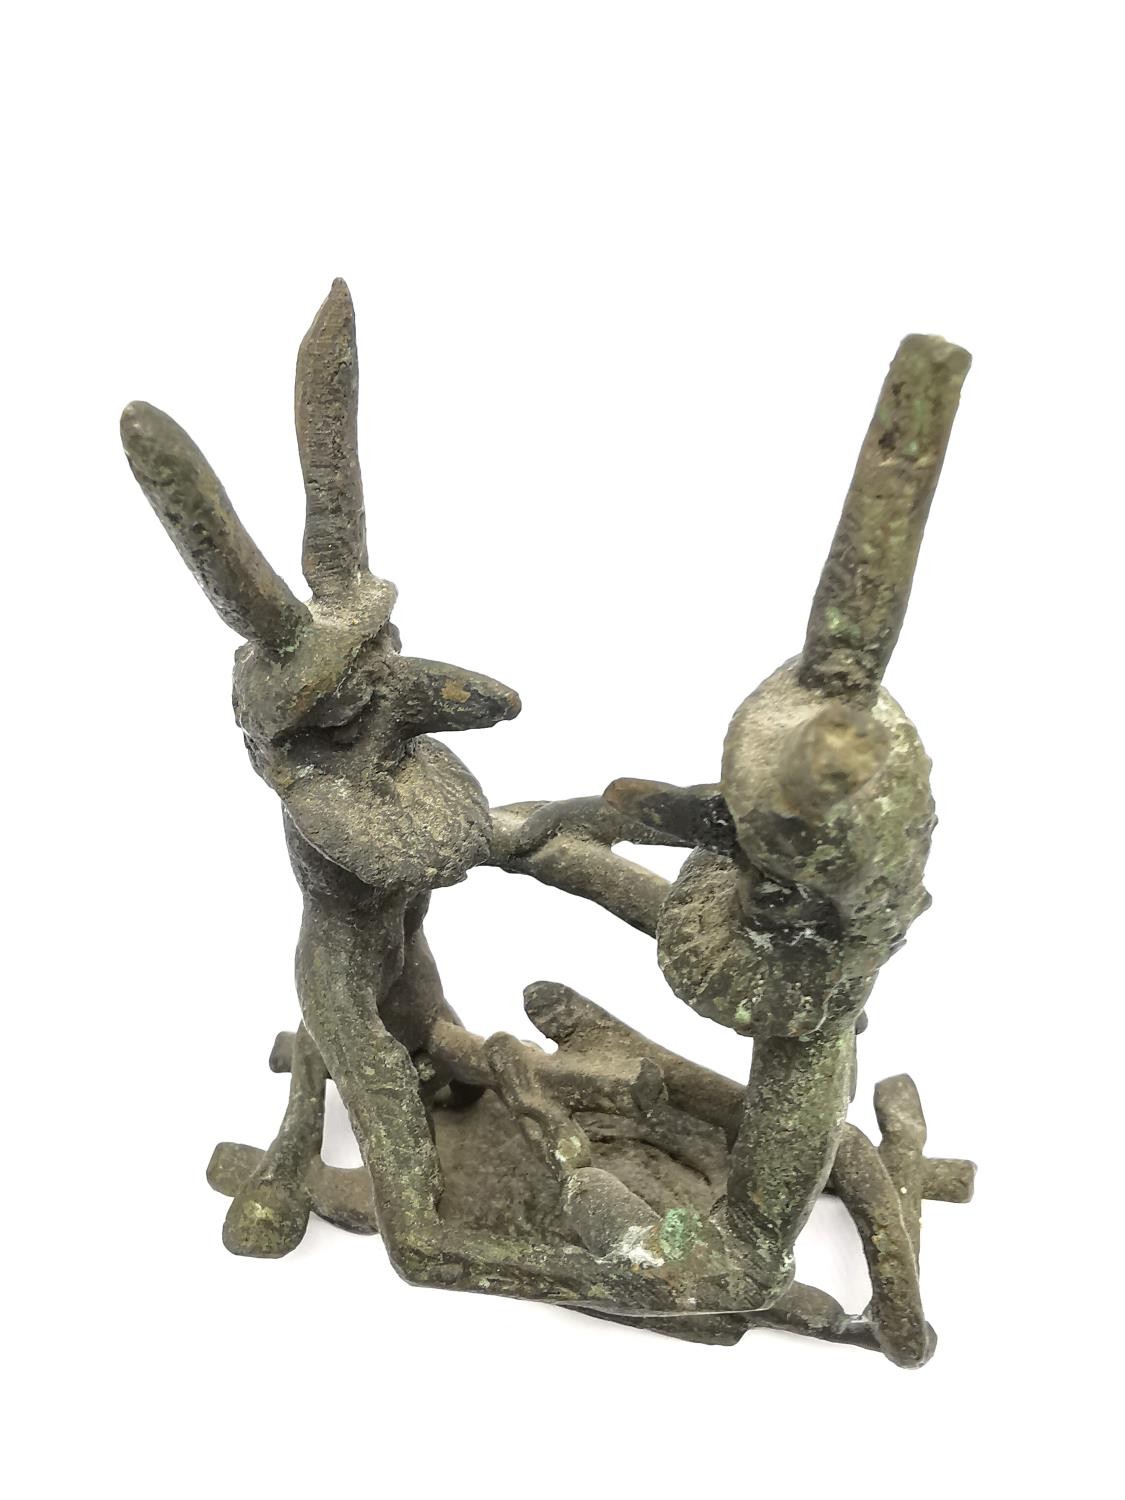 A Tribal bronze erotic sculpture of two bearded mythical creatures fighting. H.12 L.10.5 W.7cm. - Image 5 of 7